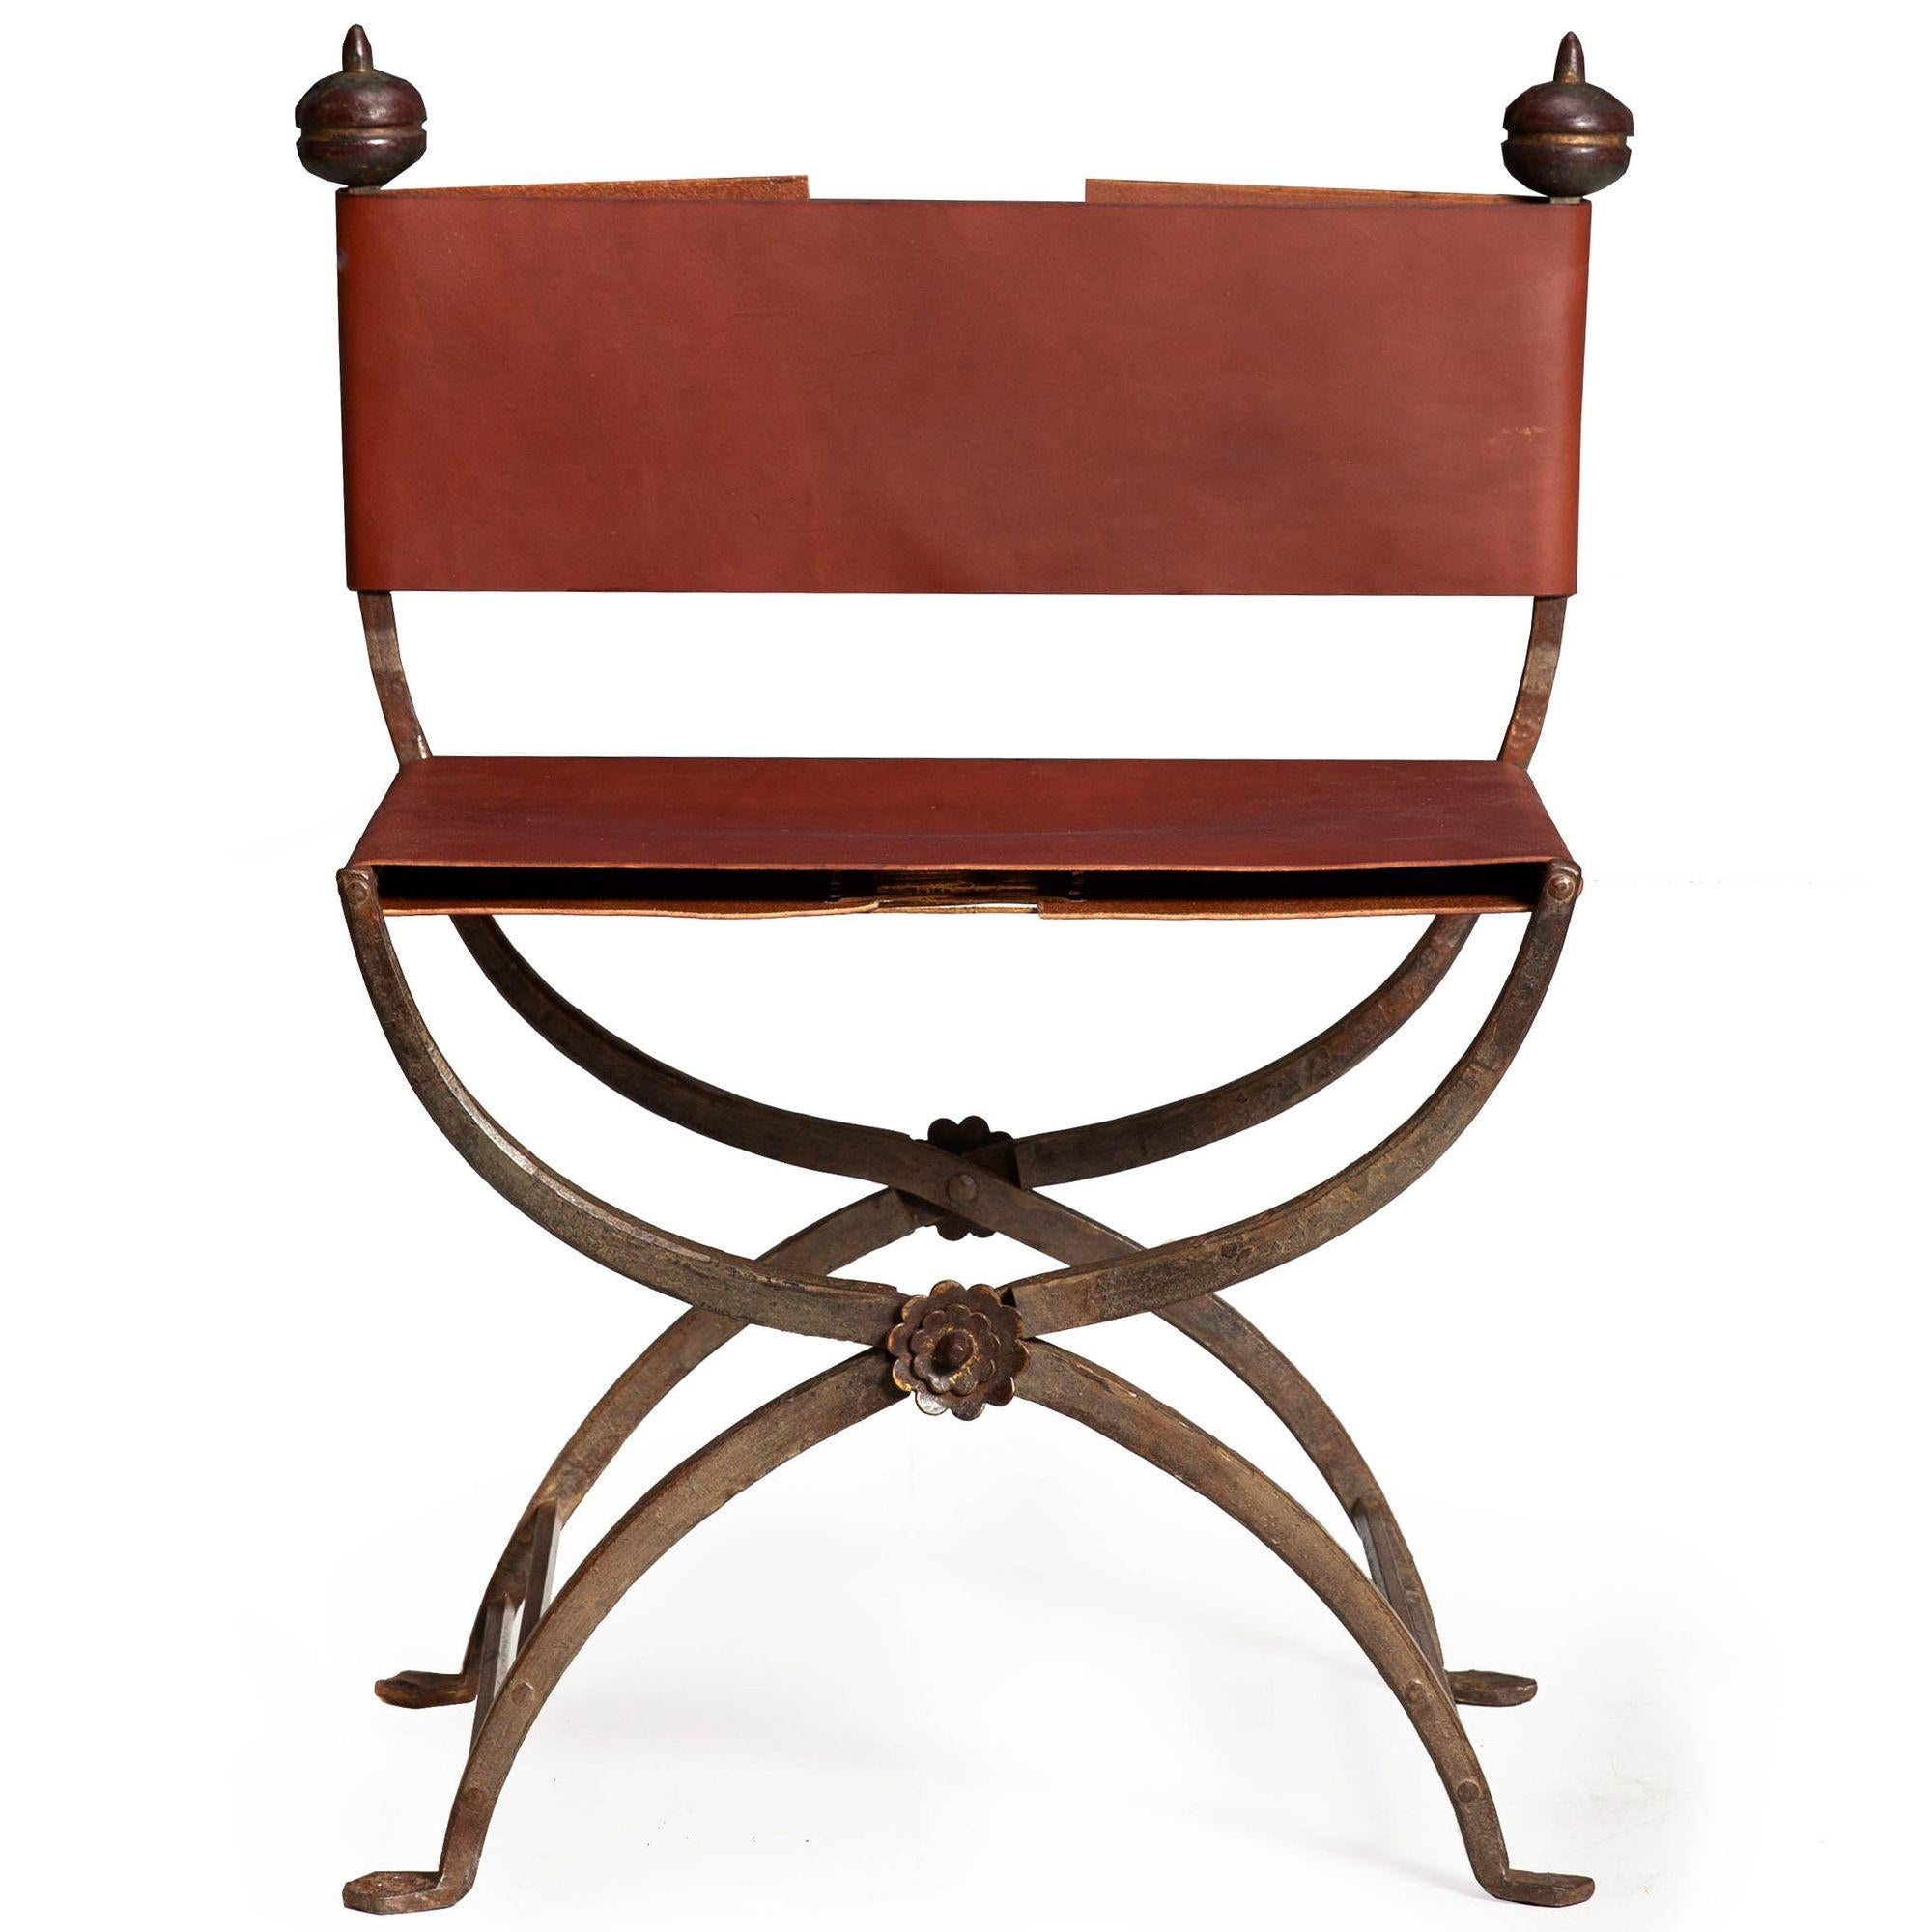 POLYCHROMED WROUGHT-IRON AND SADDLE-LEATHER SAVONAROLA CHAIR
With cerule form, probably early 20th century
Item # 311ESB30P
** Sold individually, but we may have up to 4 of these chairs available **

A very compelling form, this classical